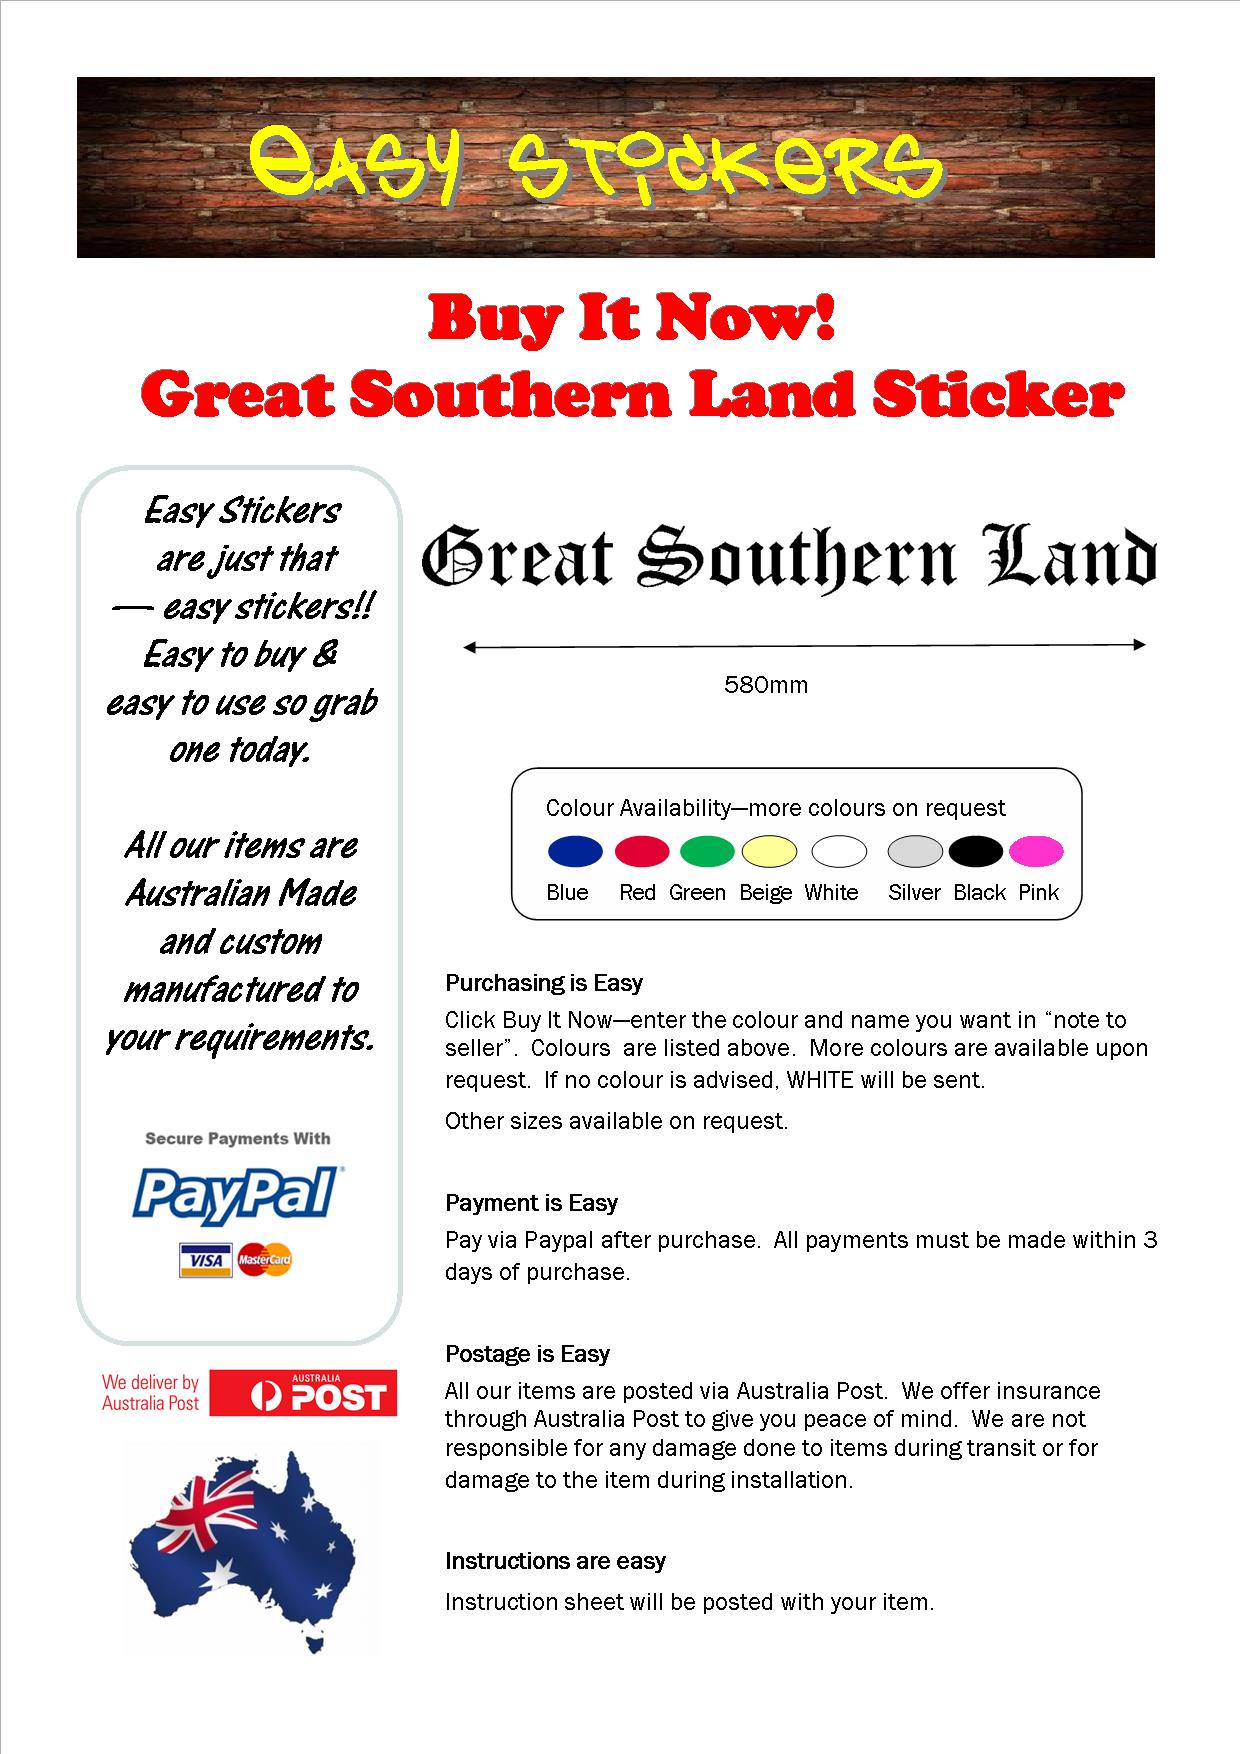 Ebay Template 580mm great southern land.jpg  by easystickers